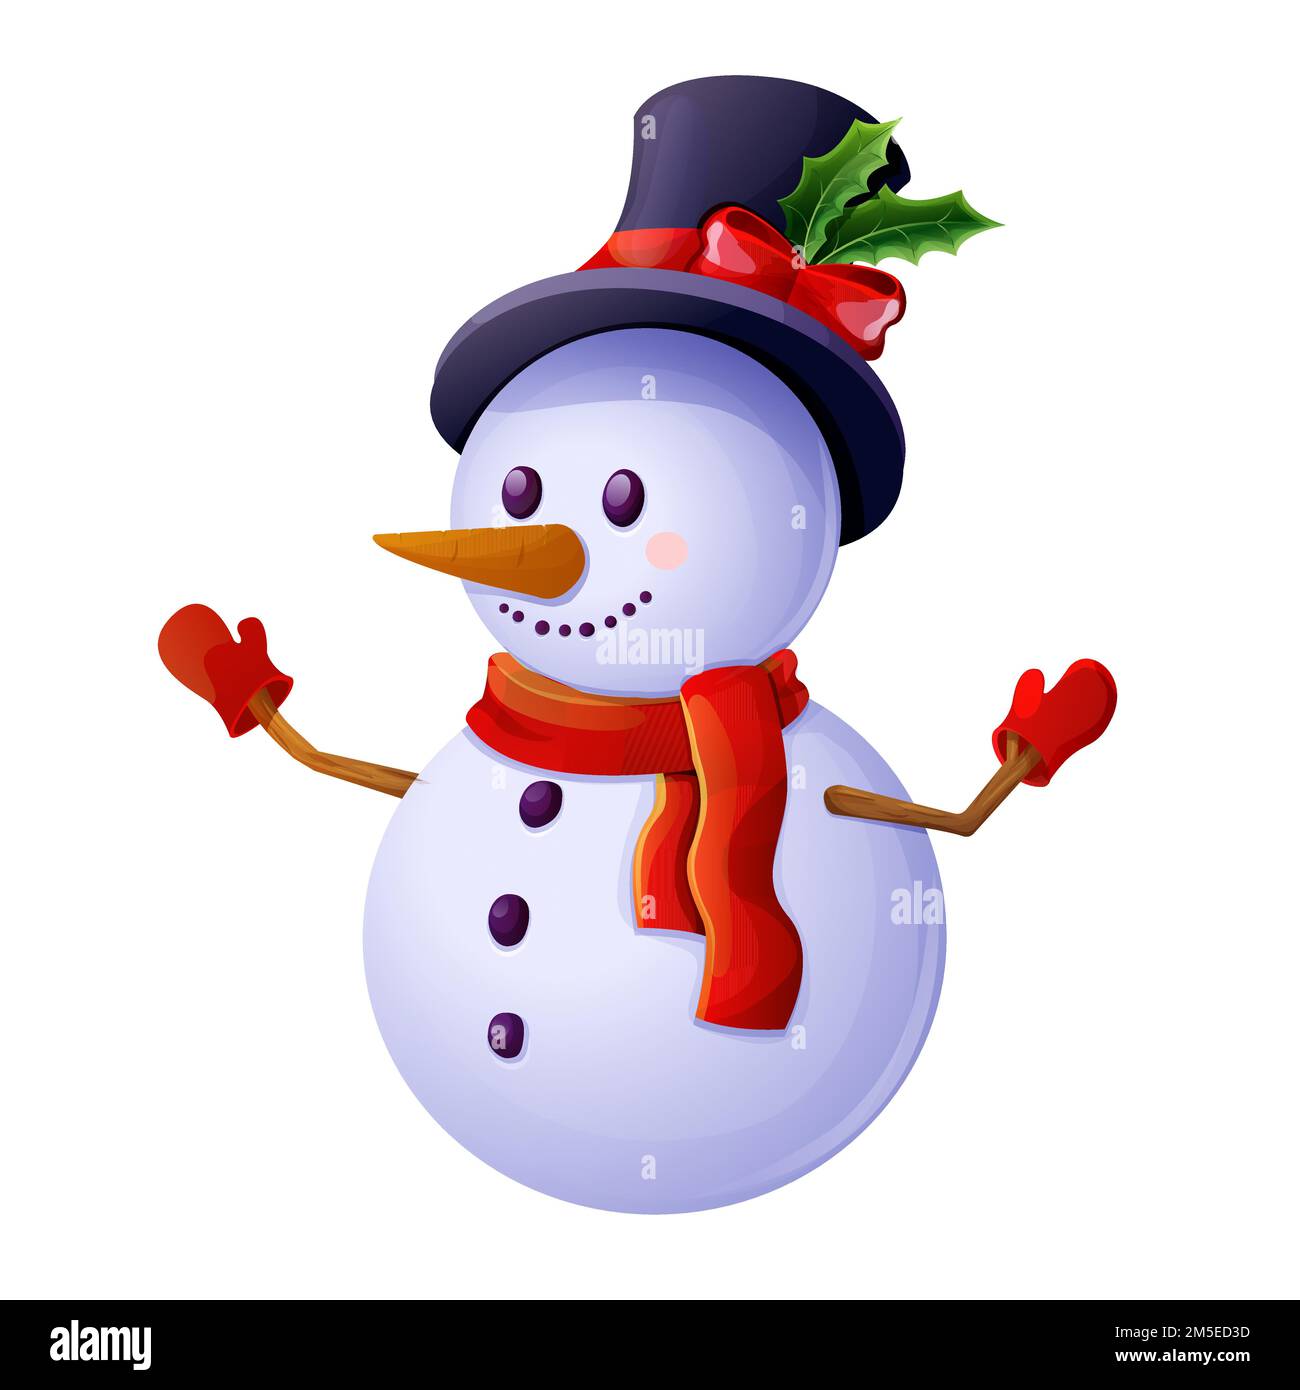 Cute snowman with top hat, scarf, emotional happy face in cartoon style isolated on white background. Christmas character, winter decoration. Vector illustration Stock Vector